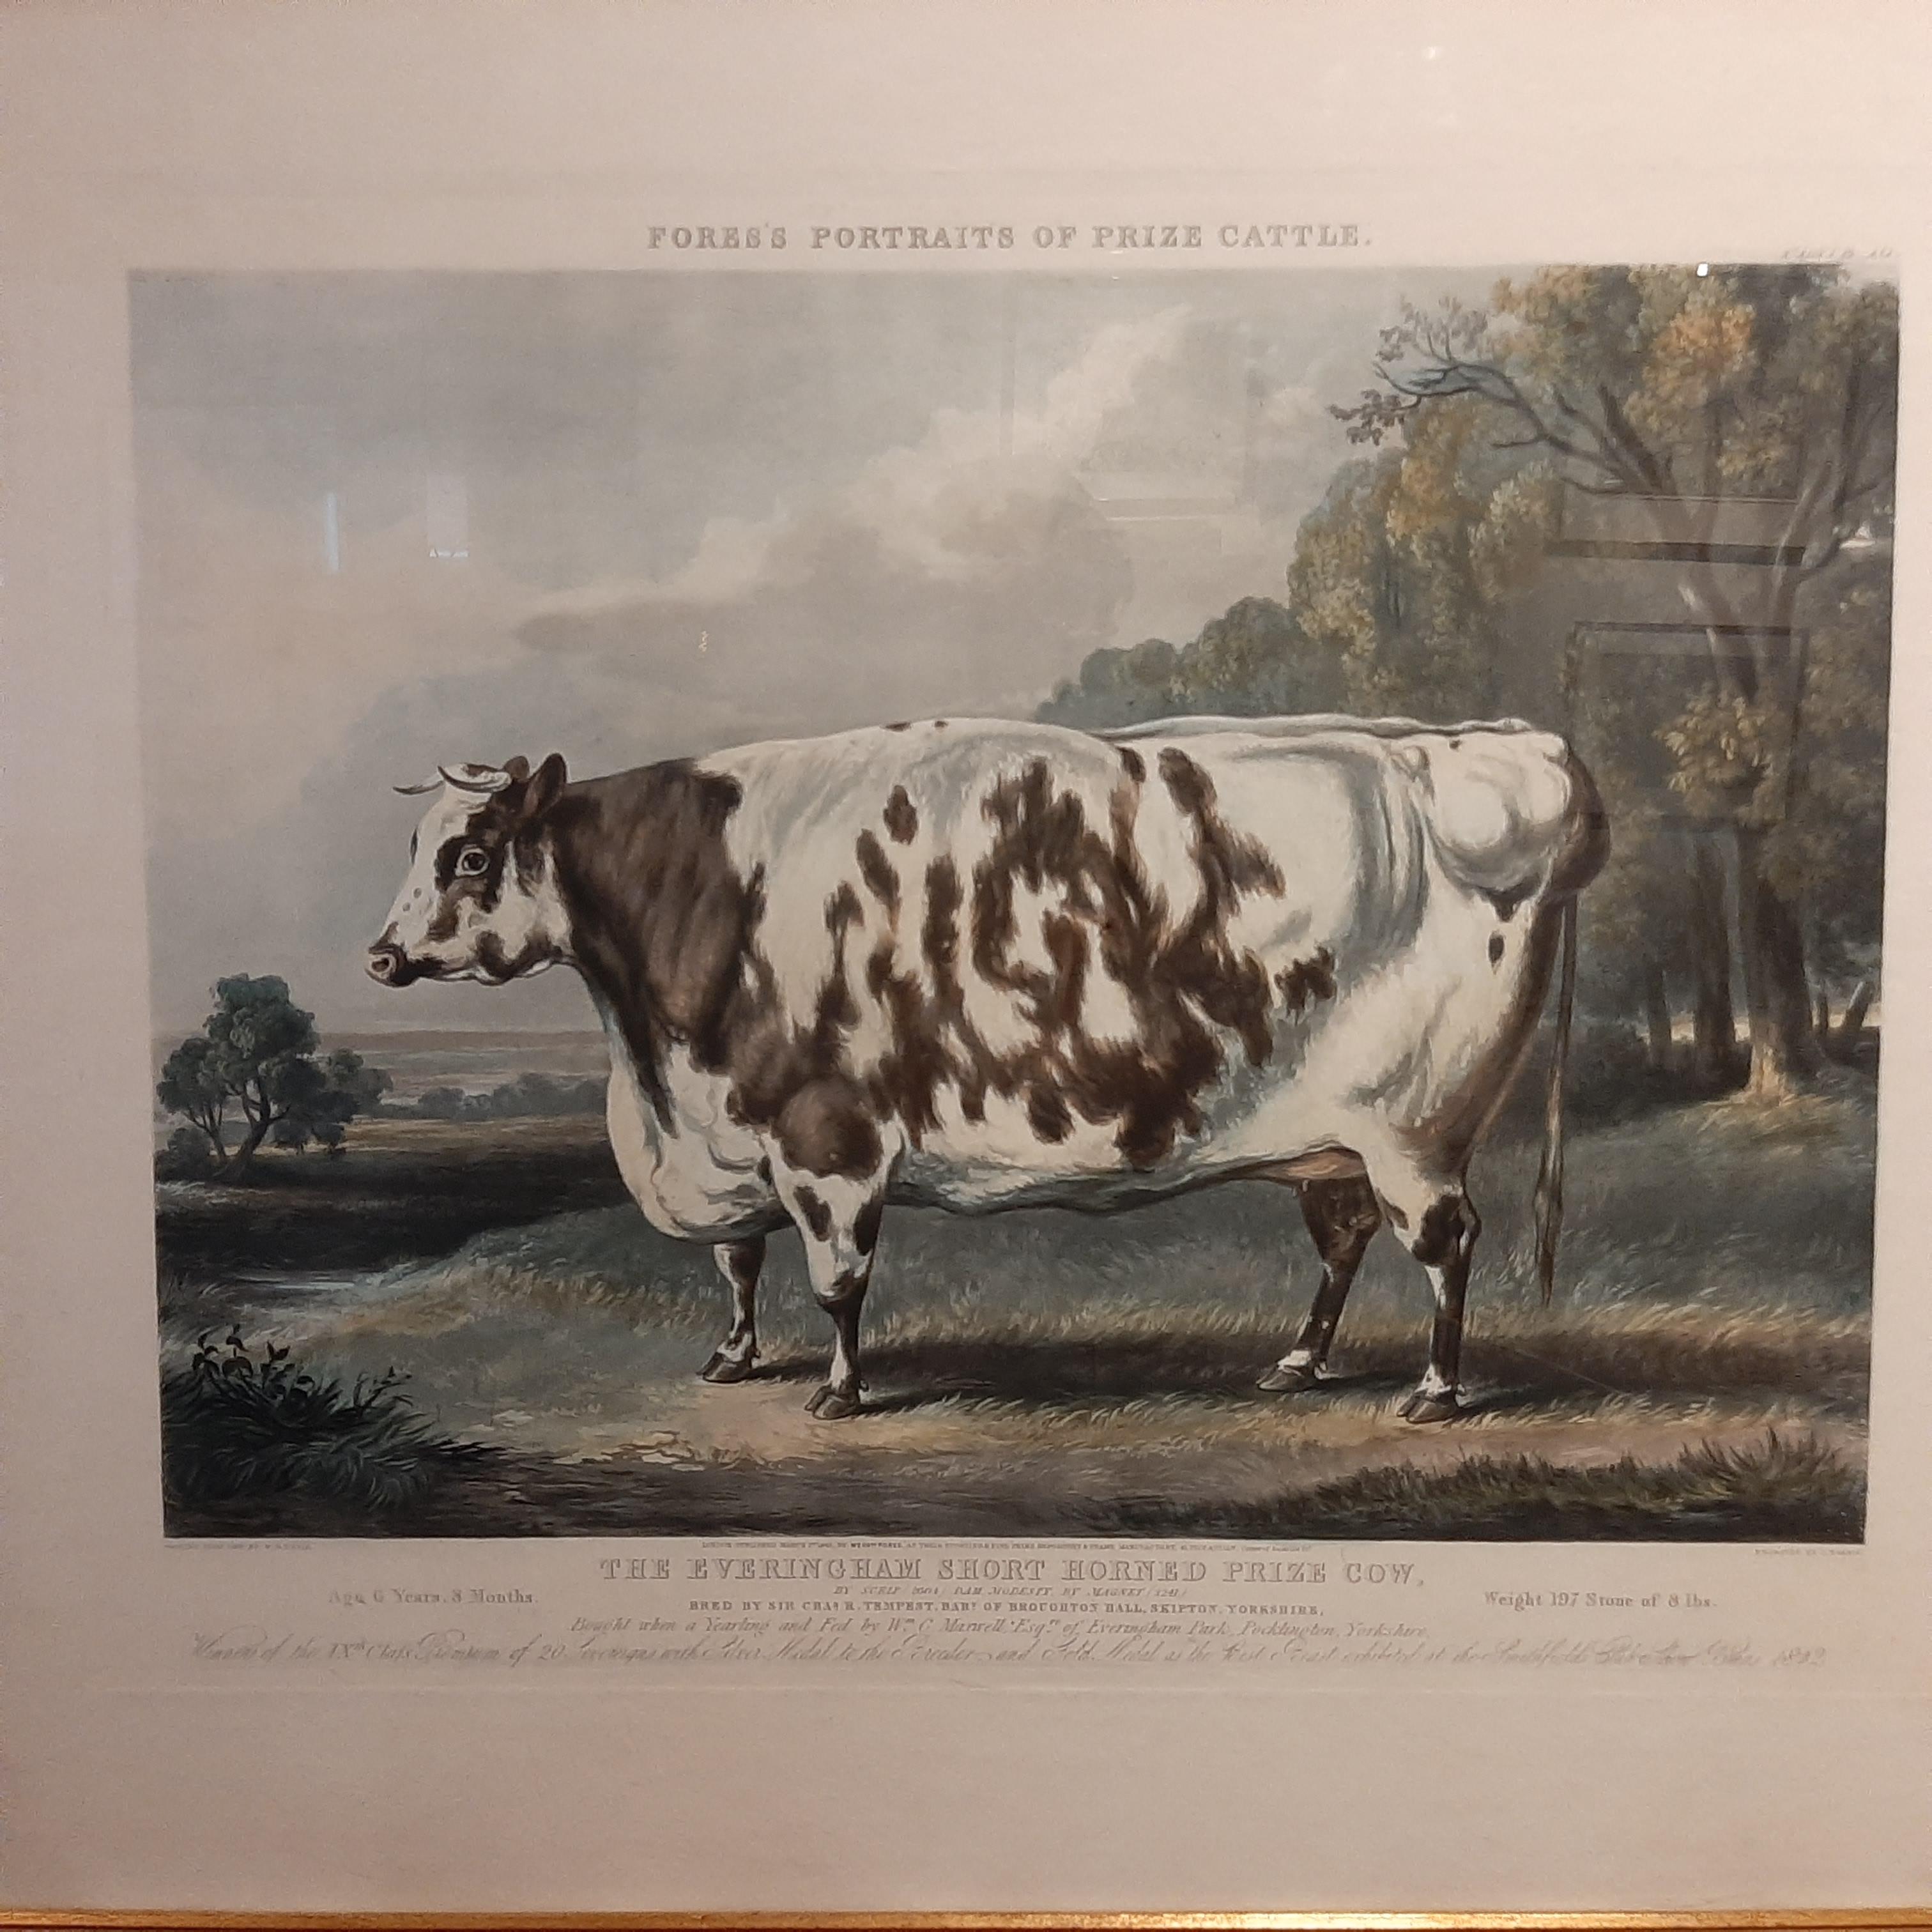 Antique print titled 'The Everingham Short Horned Prize Cow'. Aquatint of prize cattle. Engraved by J.Harris after a painting by W.H. Davis. It is inscribed below the image 'Bred by Sir Charles R. Tempest, Bart. of Broughton Hall, Skipton,